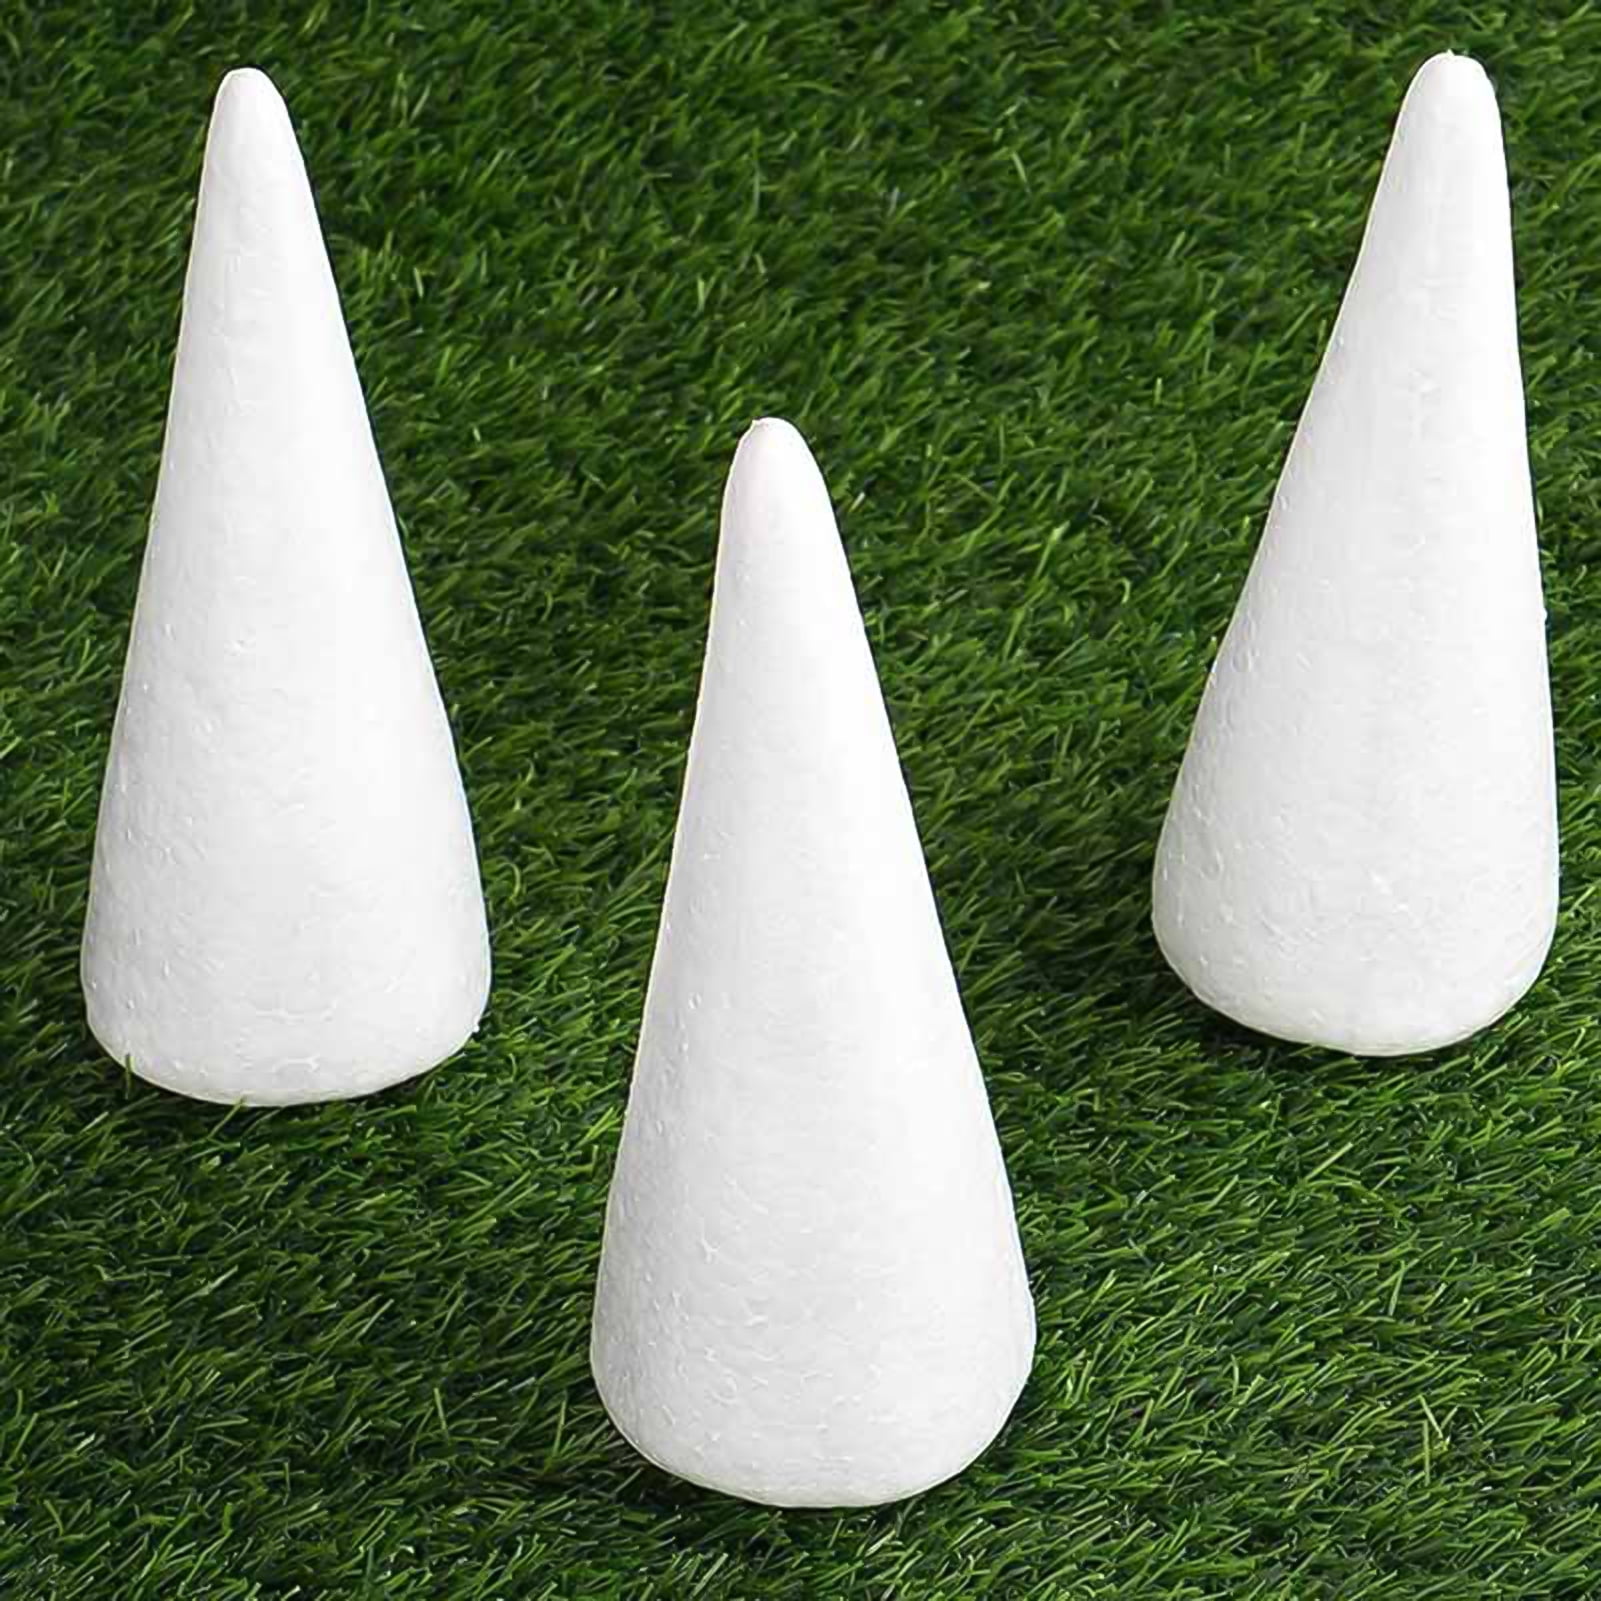 Clupup Styrofoam Foam Cones Polystyrene for Crafts DIY Painting Triangle  Tree White Foam Cones DIY Home Craft Kids Styrofoam Cones for Christmas  Tree